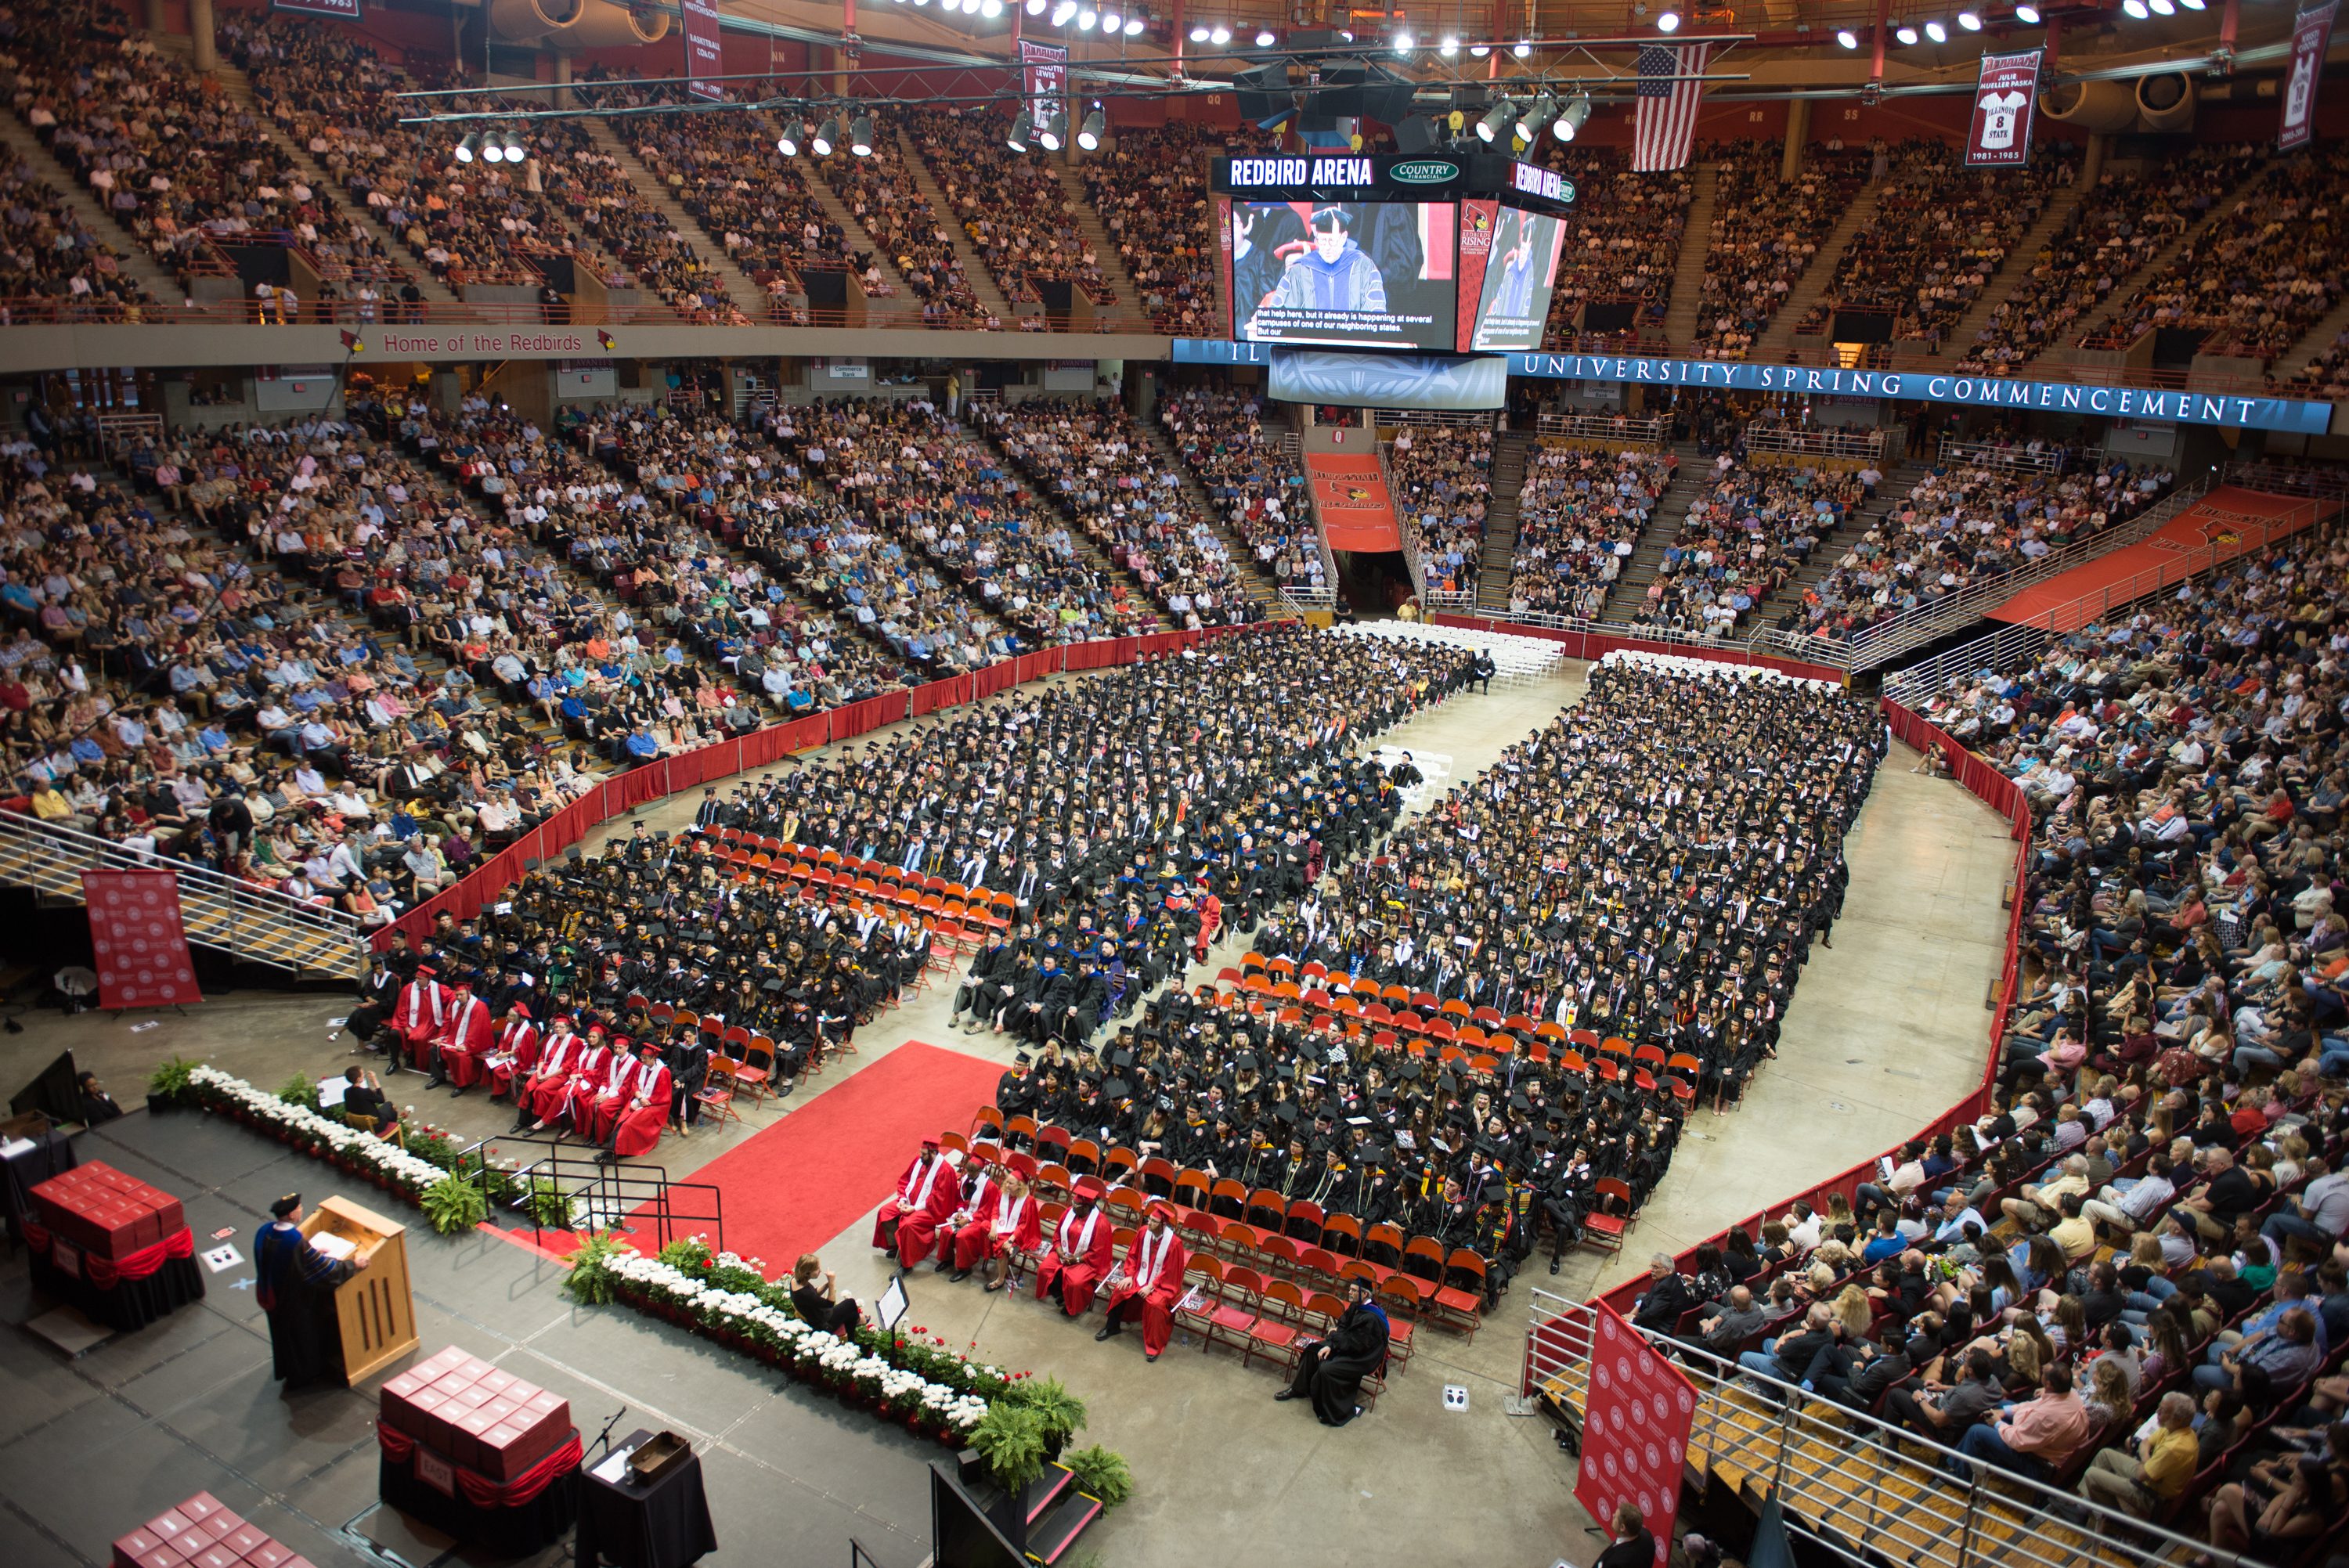 A view of the filled Redbird Arena from high in the stands at Commencement